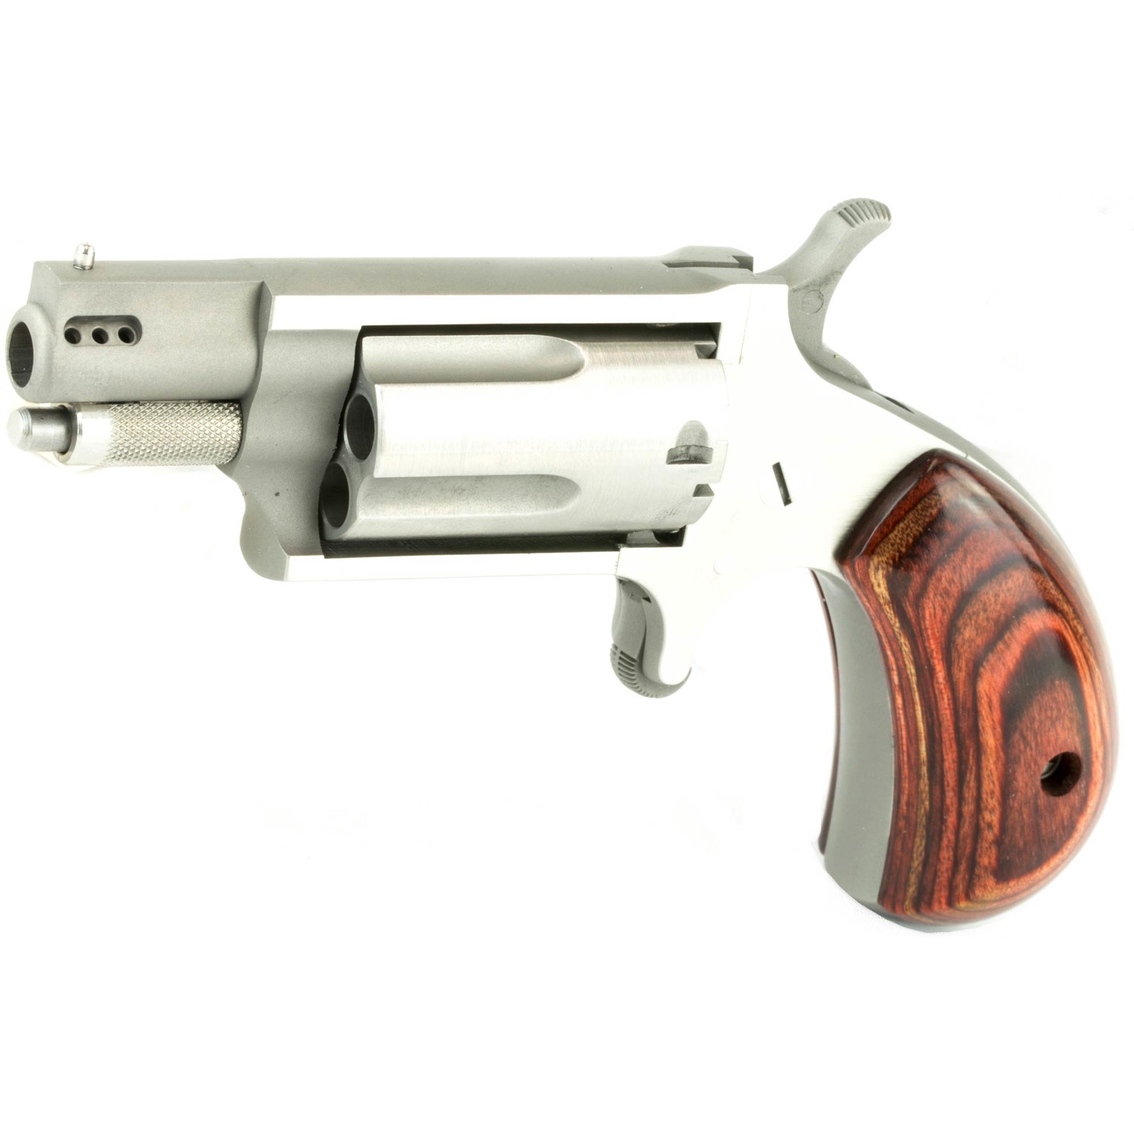 NAA Ported Snub 22 WMR 1.125 in. Barrel 5 Rds Revolver Stainless Steel - Image 3 of 3